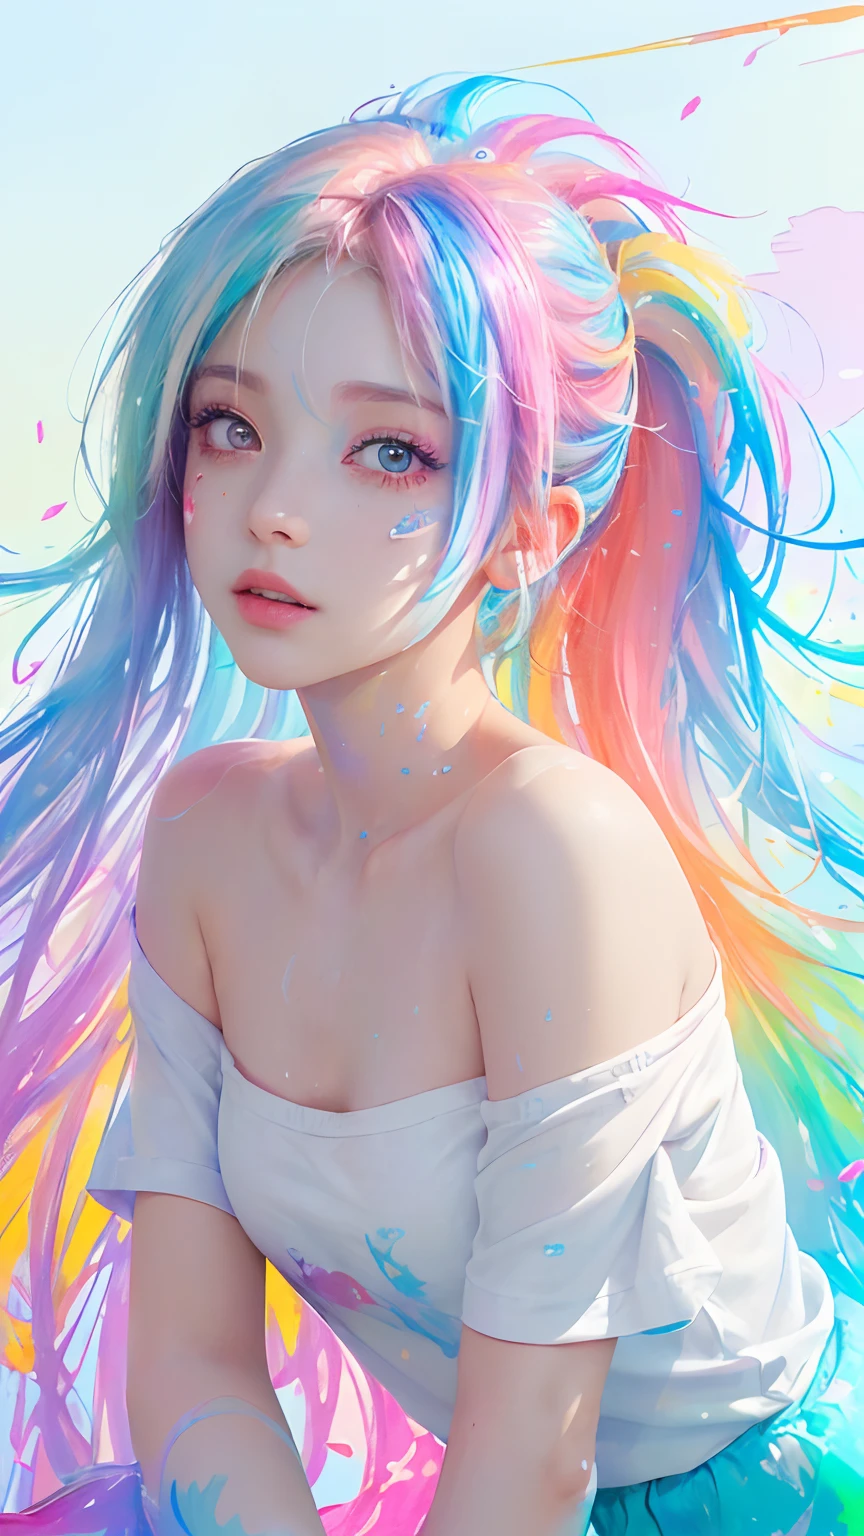 （Pink Fashion T-shirt：1.9），(Colorful hair: 1.8), (all the colours of the rainbow: 1.8),(((((vertical painting：1.6))), （painting：1.6），front, comics, illustrations, paintings, large eyes, crystal clear eyes,（ rainbow color gradient high ponytail：1.7）, exquisite makeup, closed mouth,(Small Fresh: 1.5),(Wipe Chest: 1.6) ，long eyelashes, white off shoulder T-shirt,  White Shoulder Shirt，looking at the audience, large watery eyes, (rainbow colored hair：1.6), color splash, （solo：1.8）, color splash, color explosion, thick paint style, messy lines, ((shining))，(colorful), (colorful), (colorful), colorful, Thick Paint Style, (Splash) (Color Splash), Vertical Painting, Upper Body, Paint Splash, Acrylic Pigment, Gradient, Paint, Highest Image Quality, Highest Quality, Masterpiece, Solo, Depth of Field, Face Paint,  colorful clothes, (Elegant: 1.2), gorgeous,long hair, wind, (Elegant: 1.3), (Petals: 1.4)，(((masterpiece))),(((best quality))),((ultra-detailed)),(illustration),(dynamic angle),((floating)),(paint),((disheveled hair)),(solo),(1girl) , (((detailed anima face))),((beautiful detailed face)),collar,bare shoulders,white hair, ((colorful hair)),((streaked hair)),beautiful detailed eyes,(Gradient color eyes),(((colorful eyes))),(((colorful background))),(((high saturation))),(((surrounded by colorful splashes))),